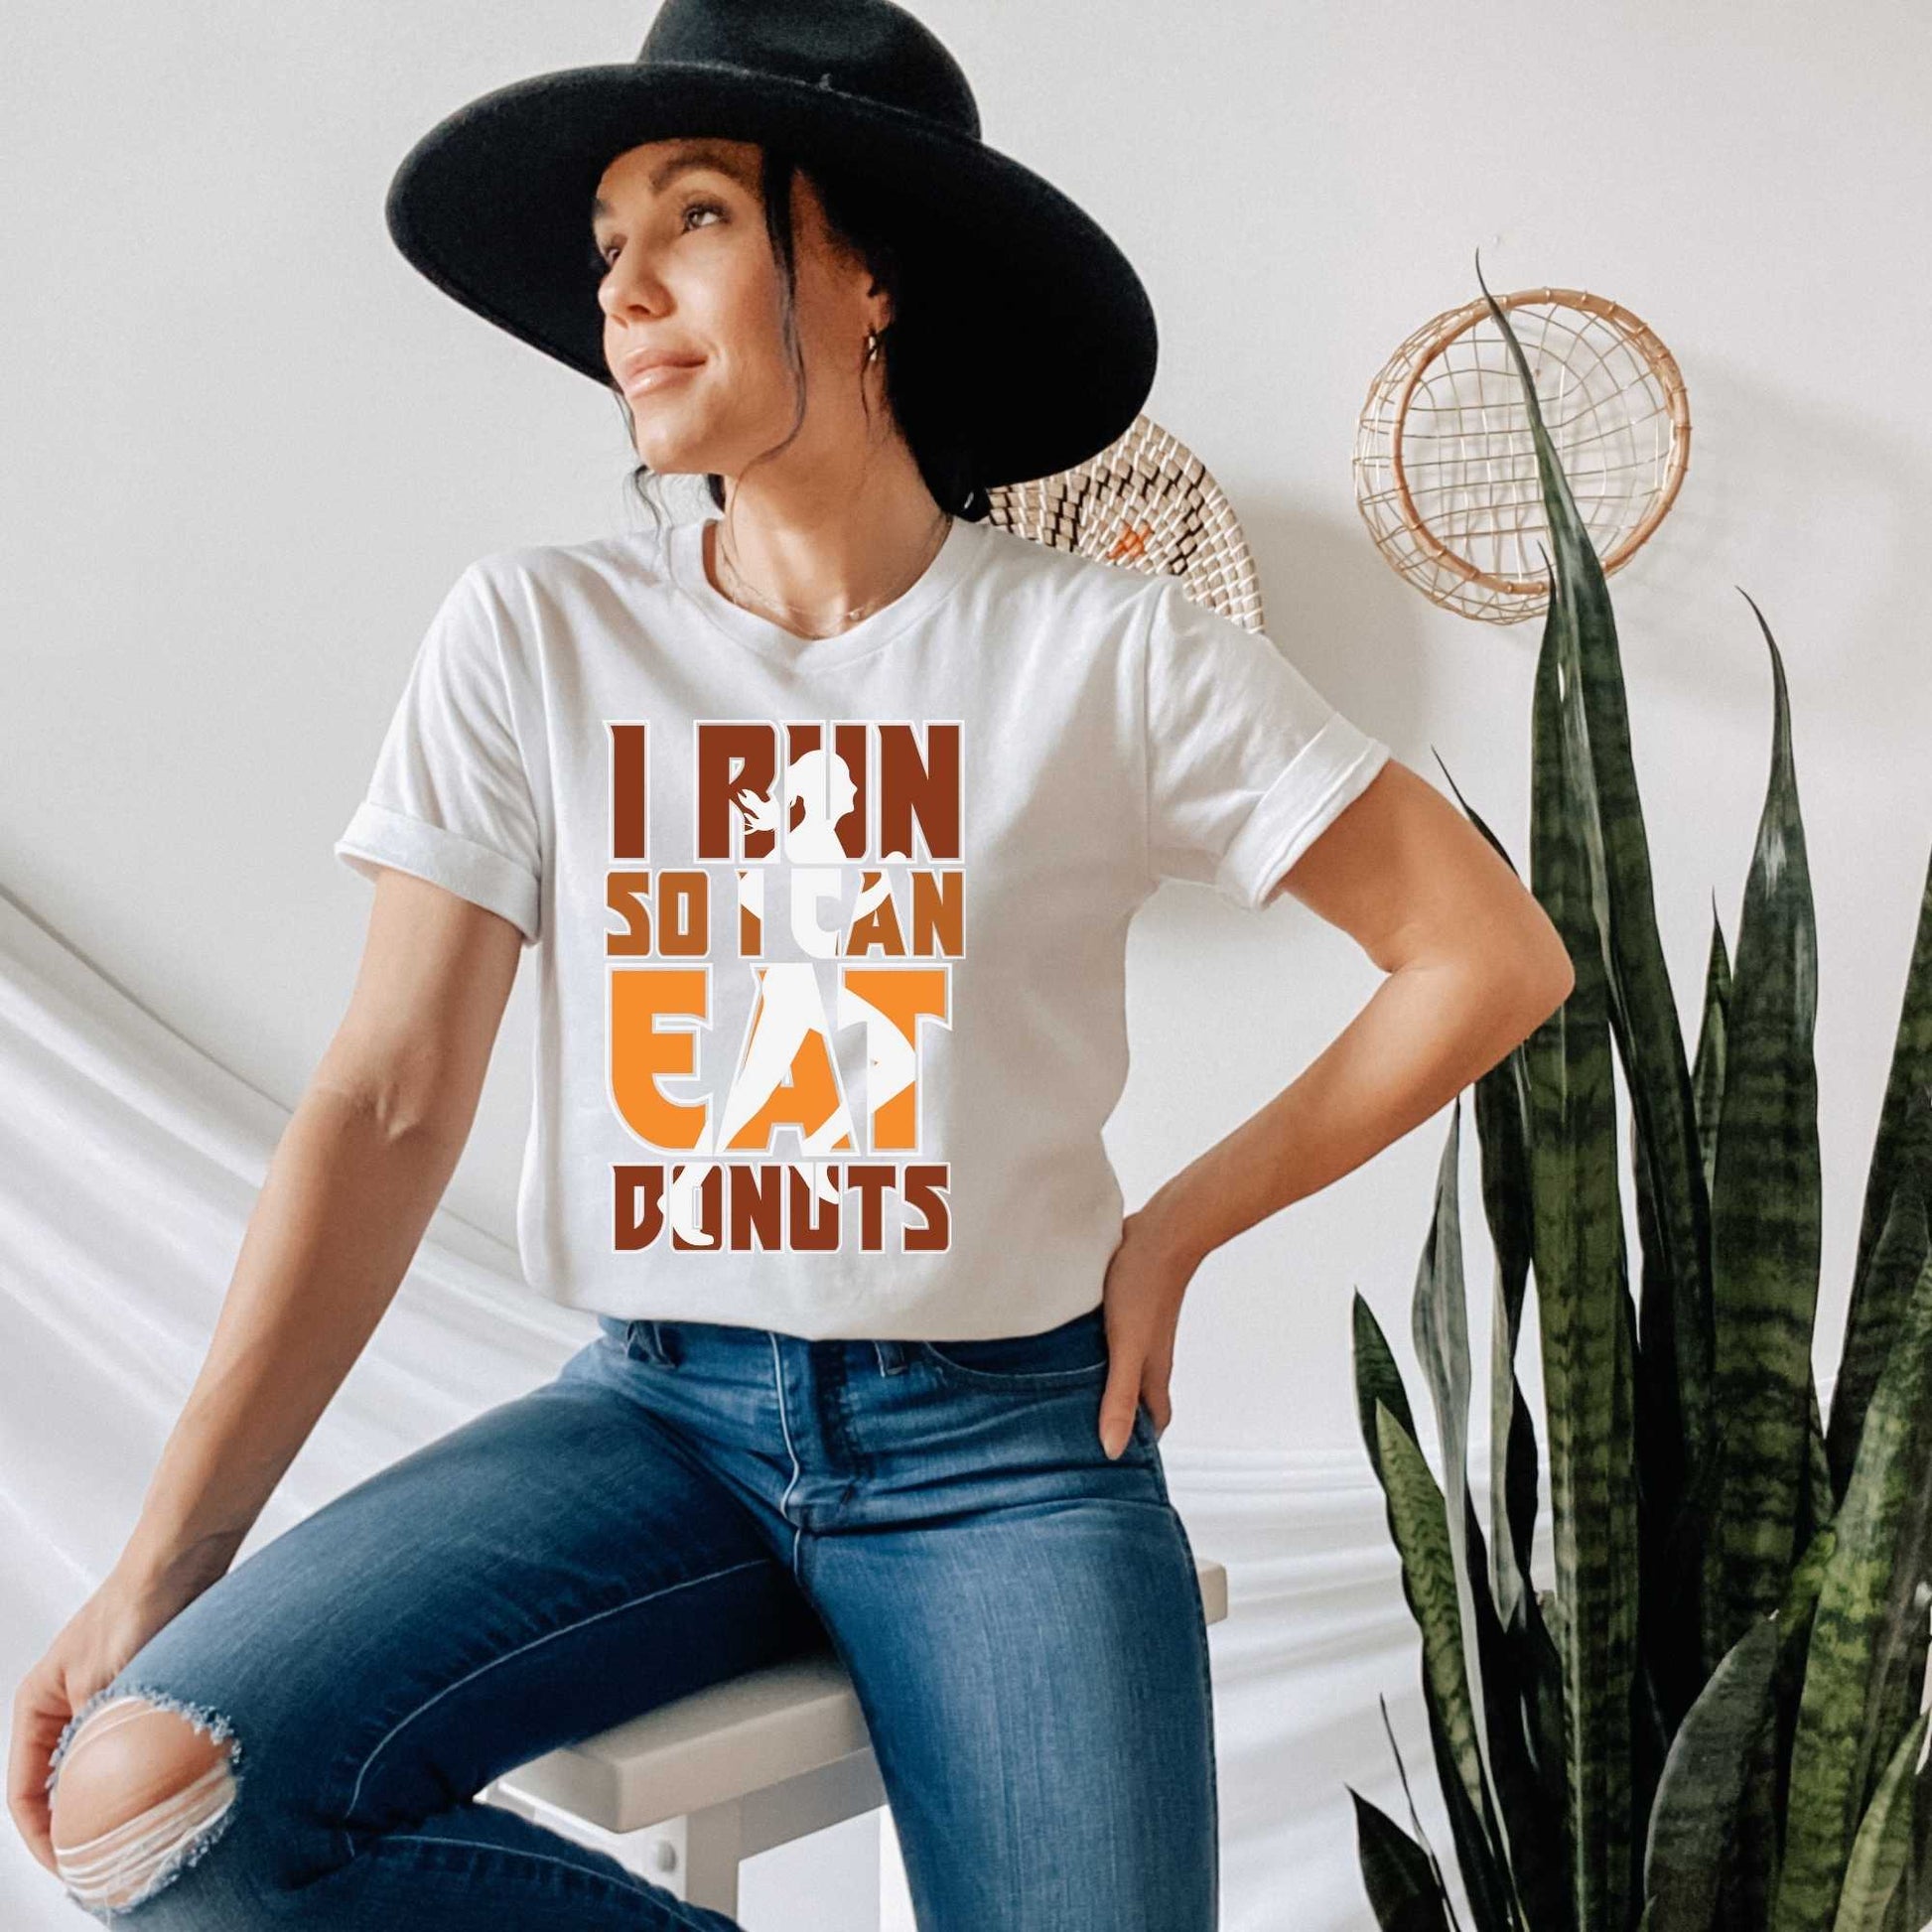 I Run So I can Eat Donuts, Running Shirts for Women or Men